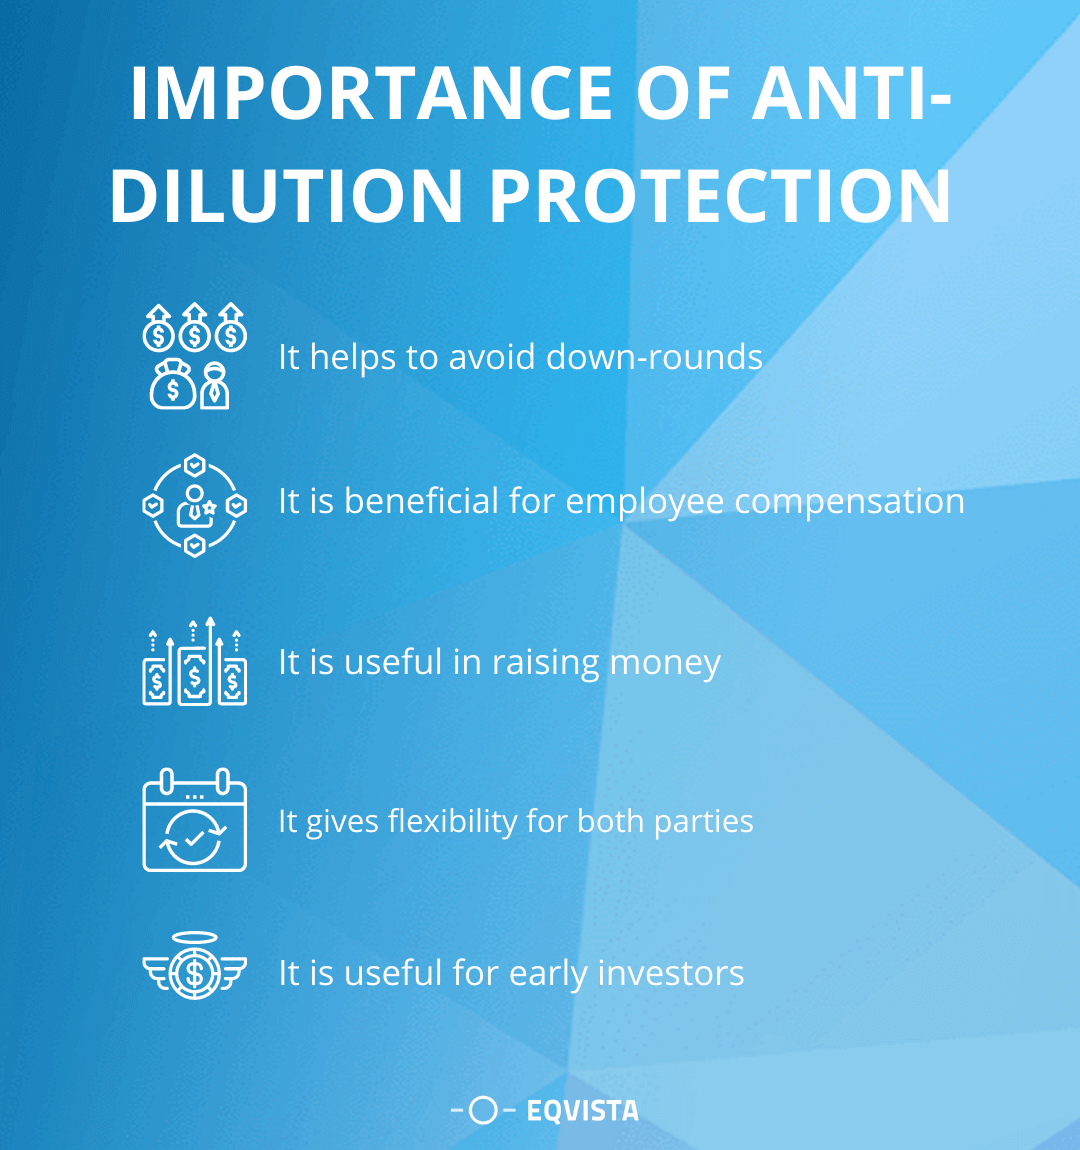 Importance of anti-dilution protection